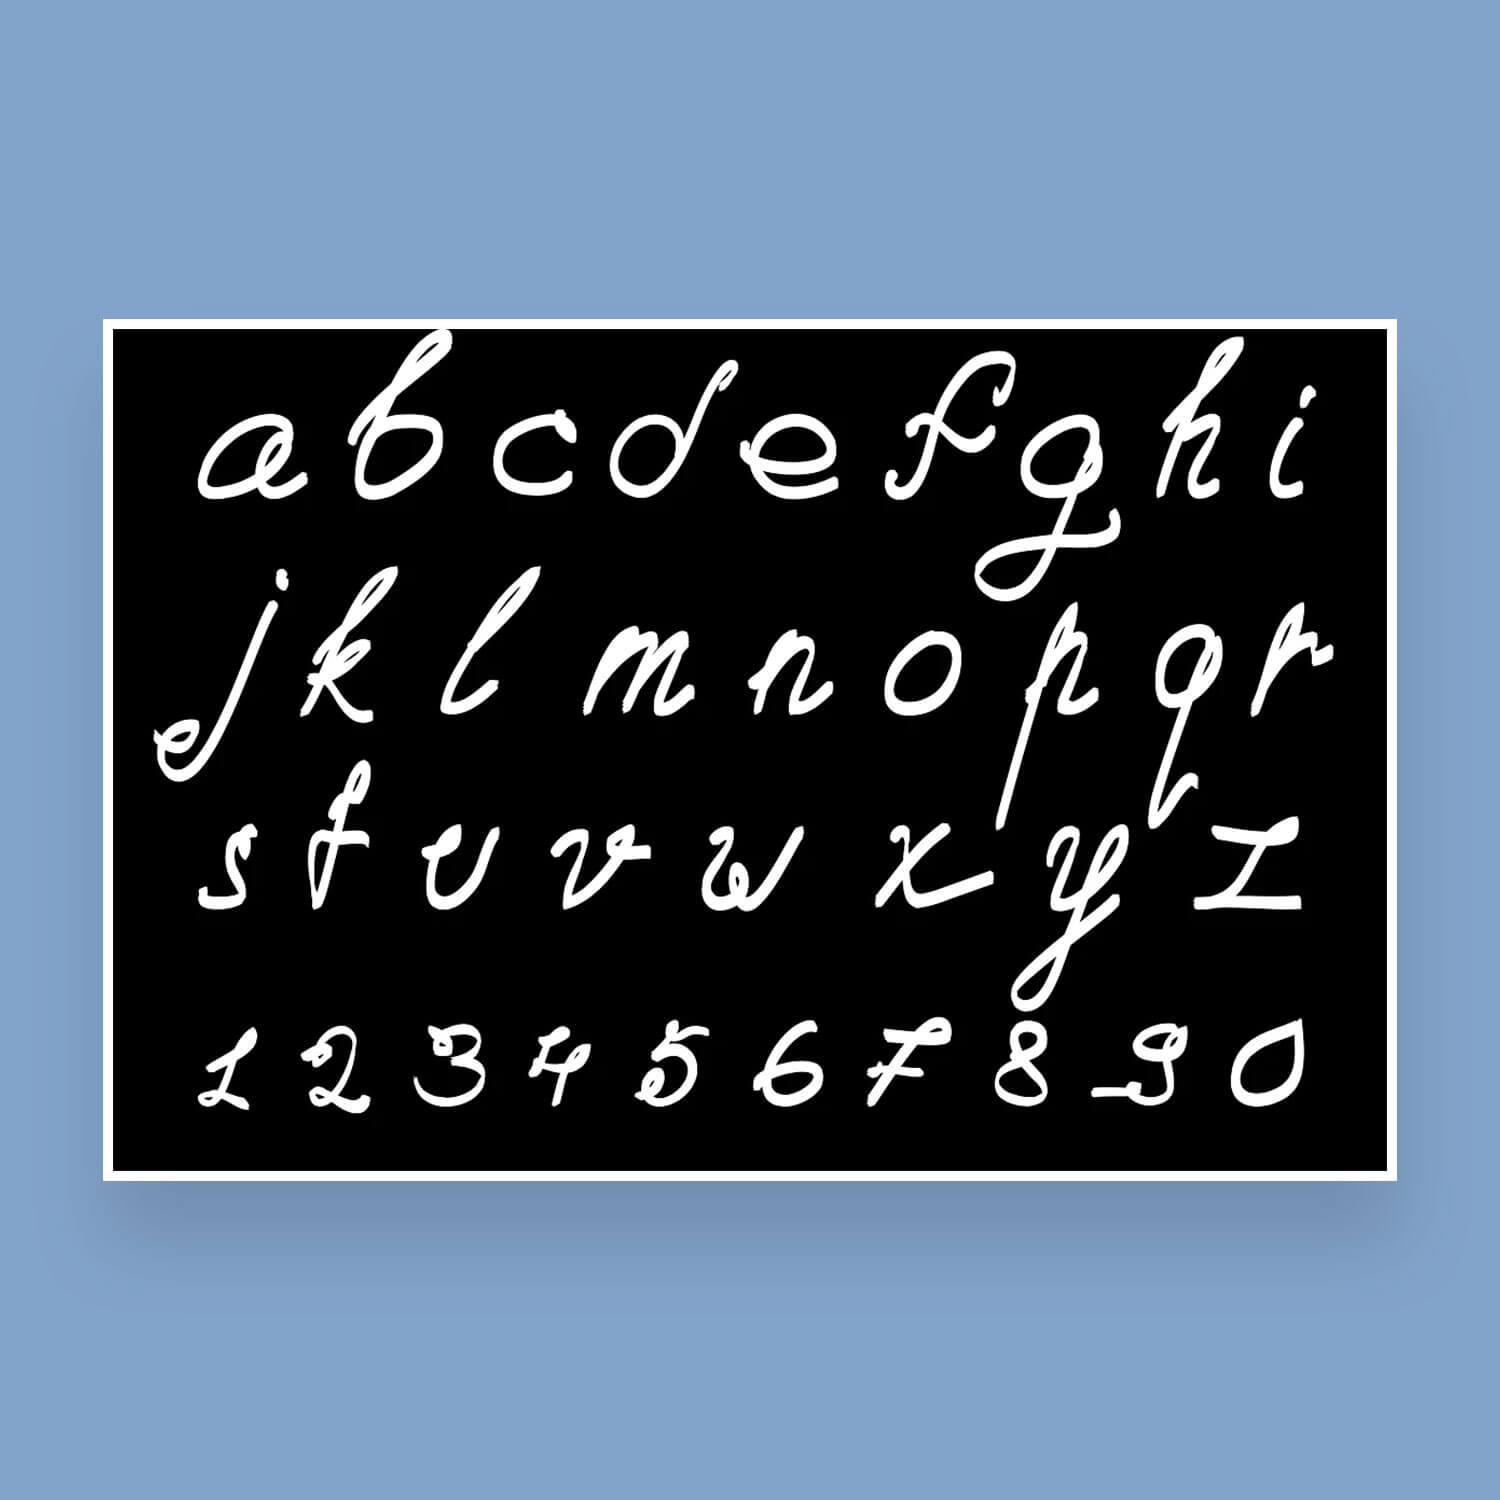 Alphabet in white on a black background in calligraphic vector font.